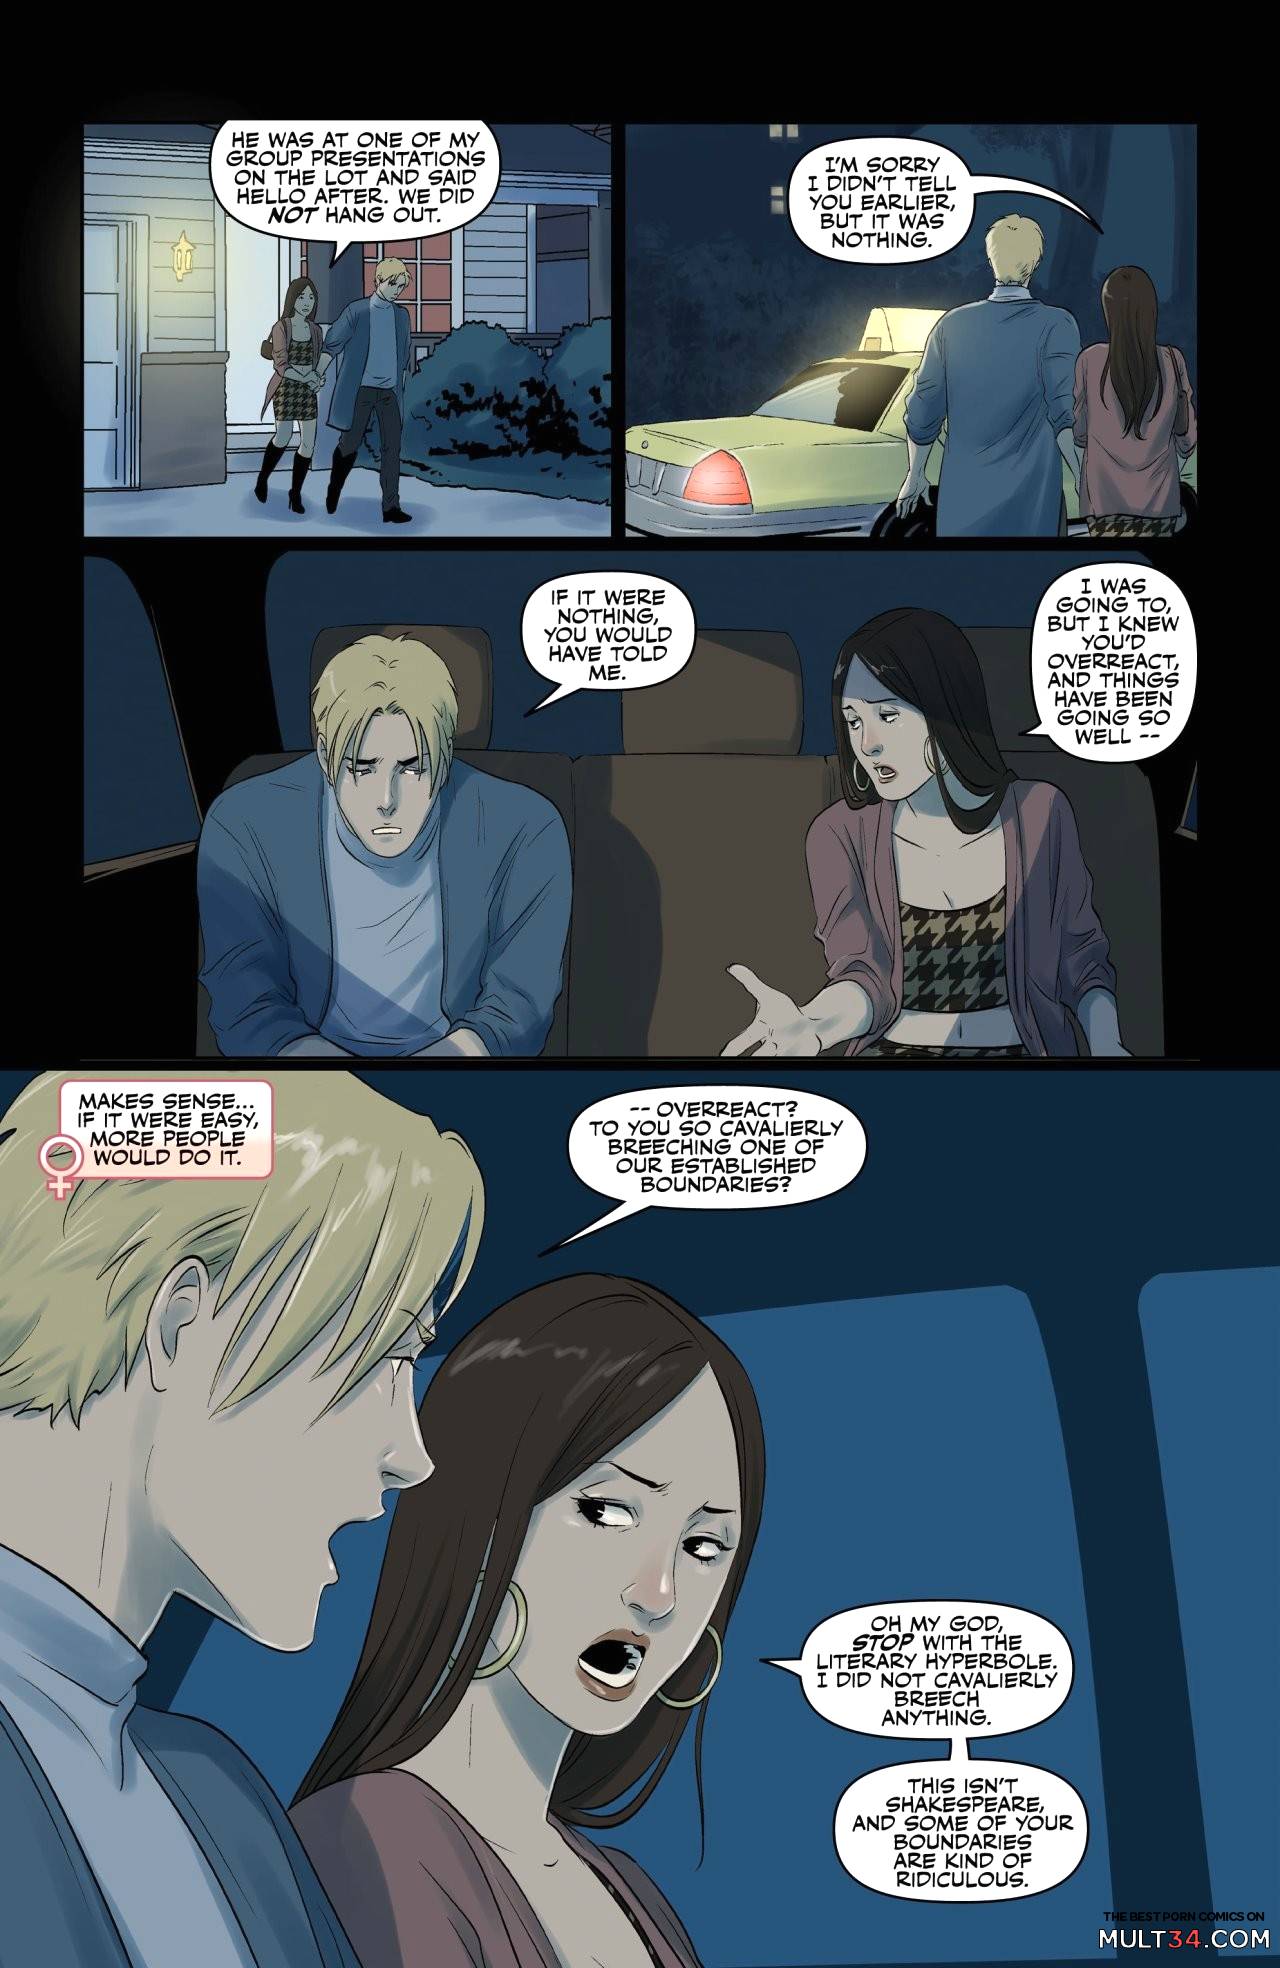 Swing - Volume 3 page 17